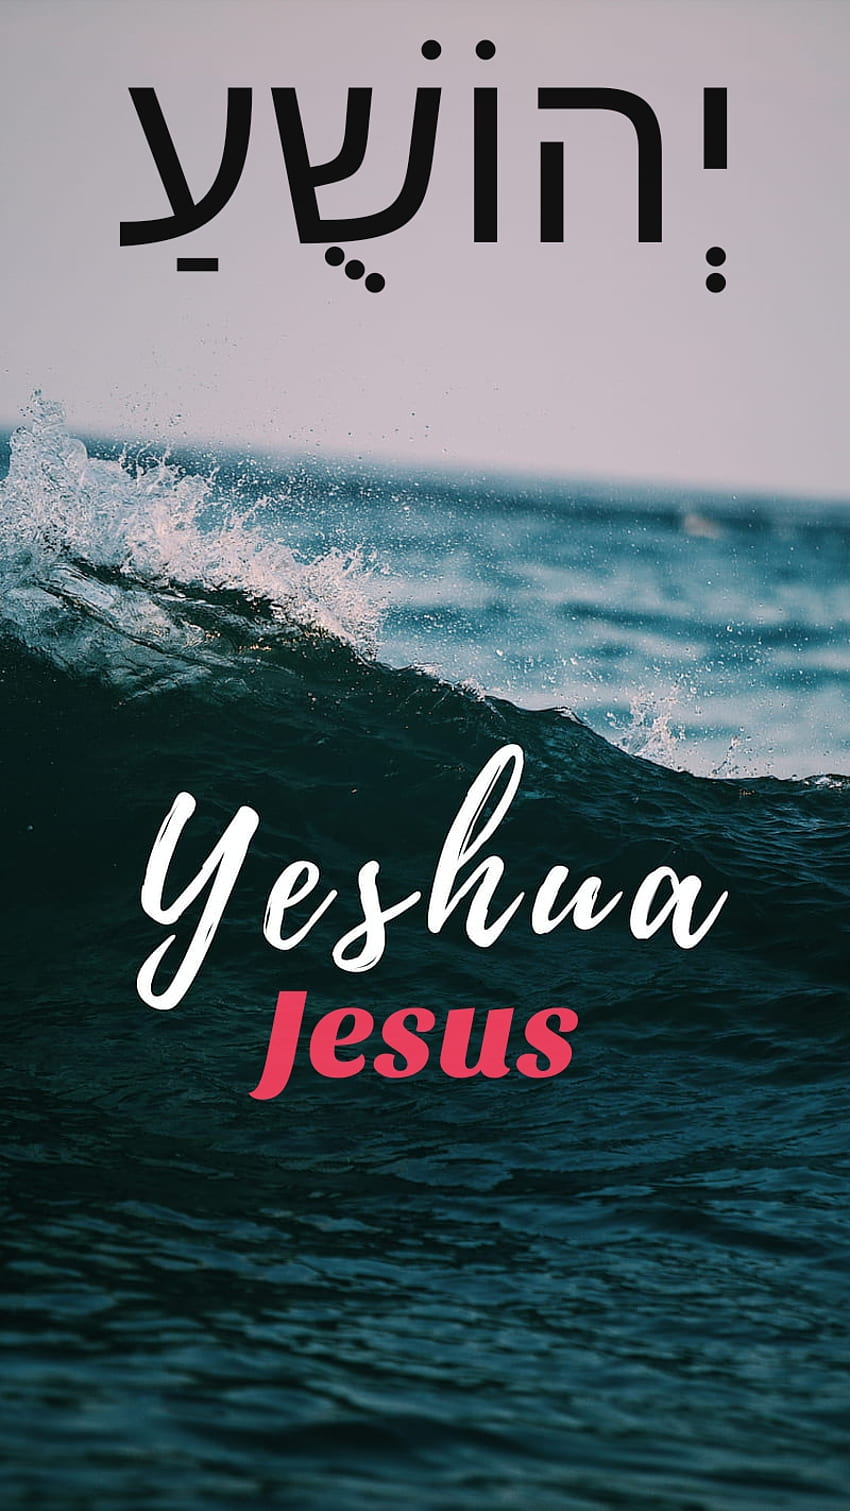 Yeshua Yesus, natural_landscape wallpaper ponsel HD